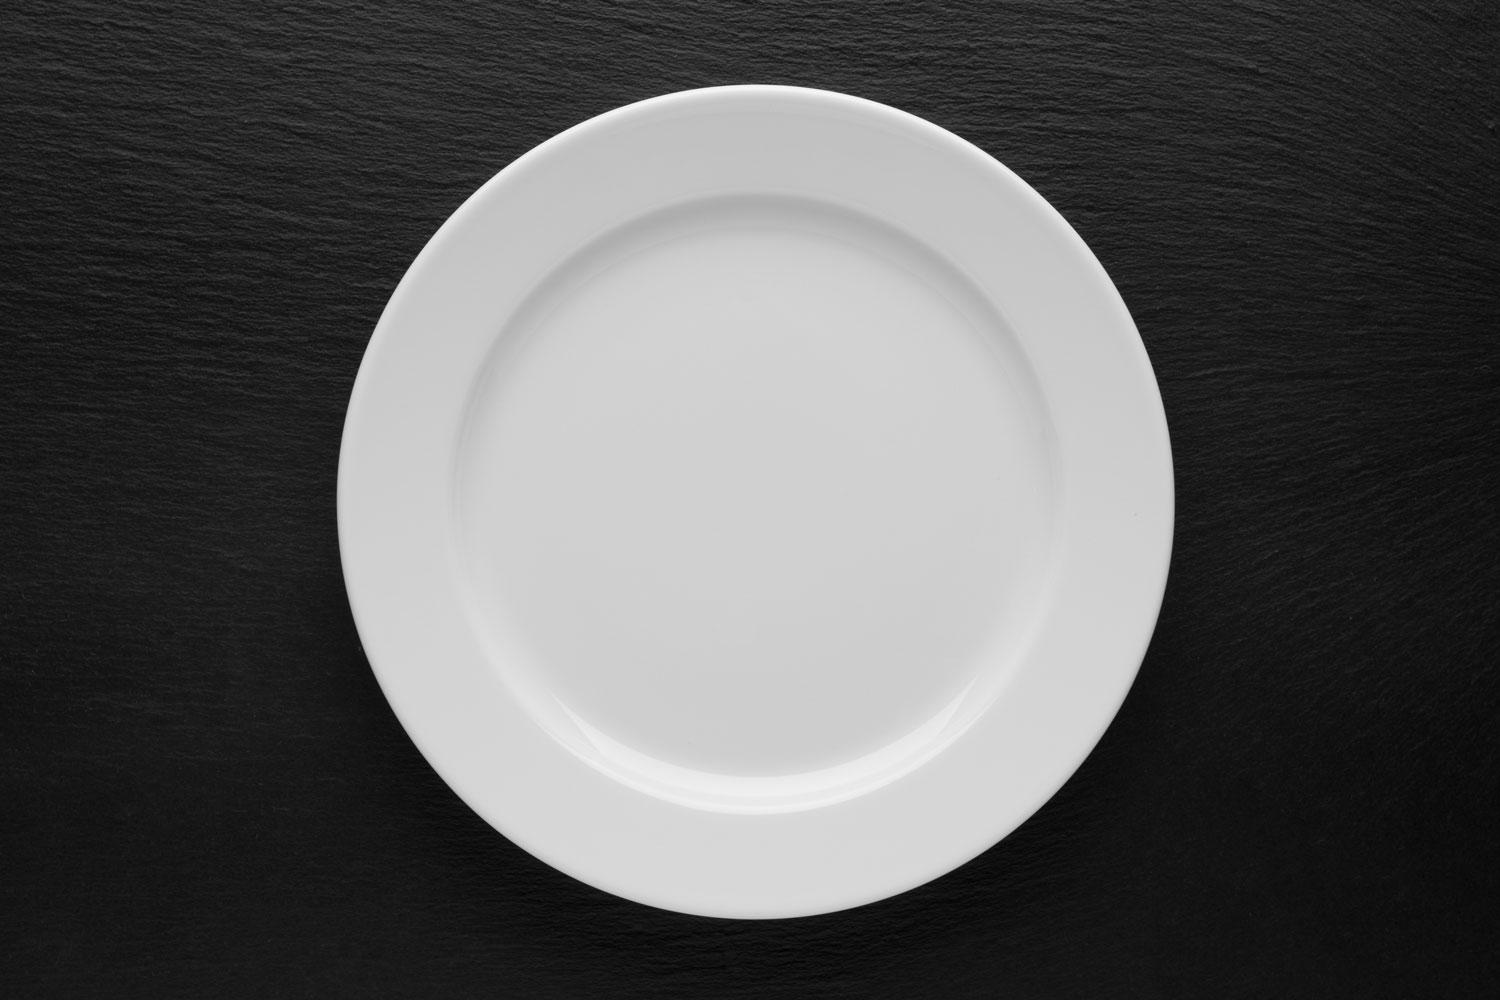 White plates on a black background